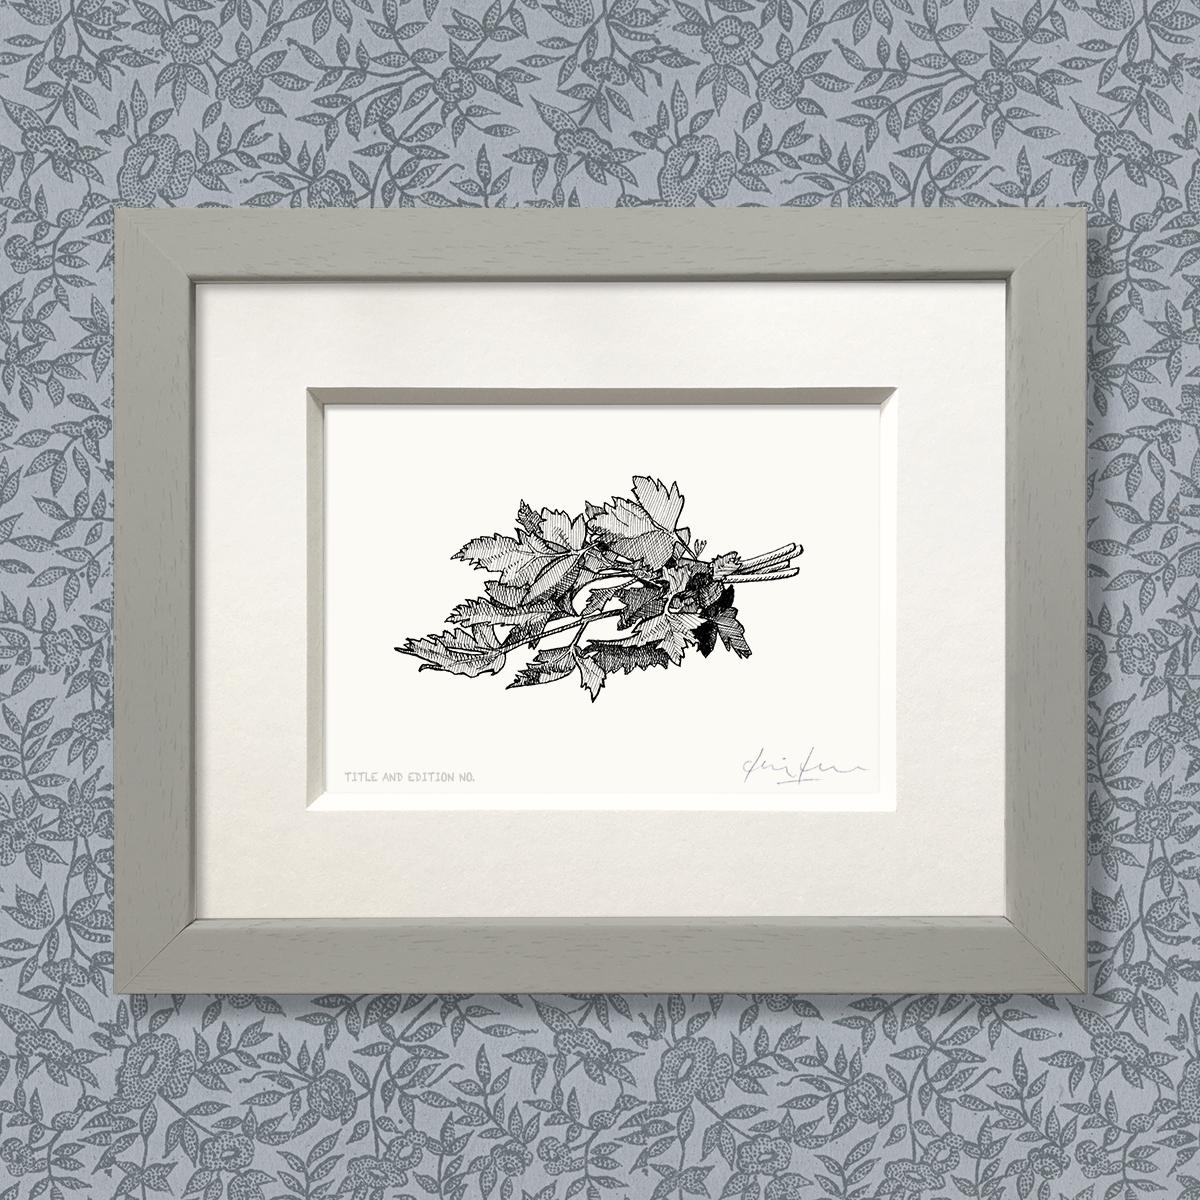 Limited edition print from pen and ink drawing of a bunch of parsley in a grey frame